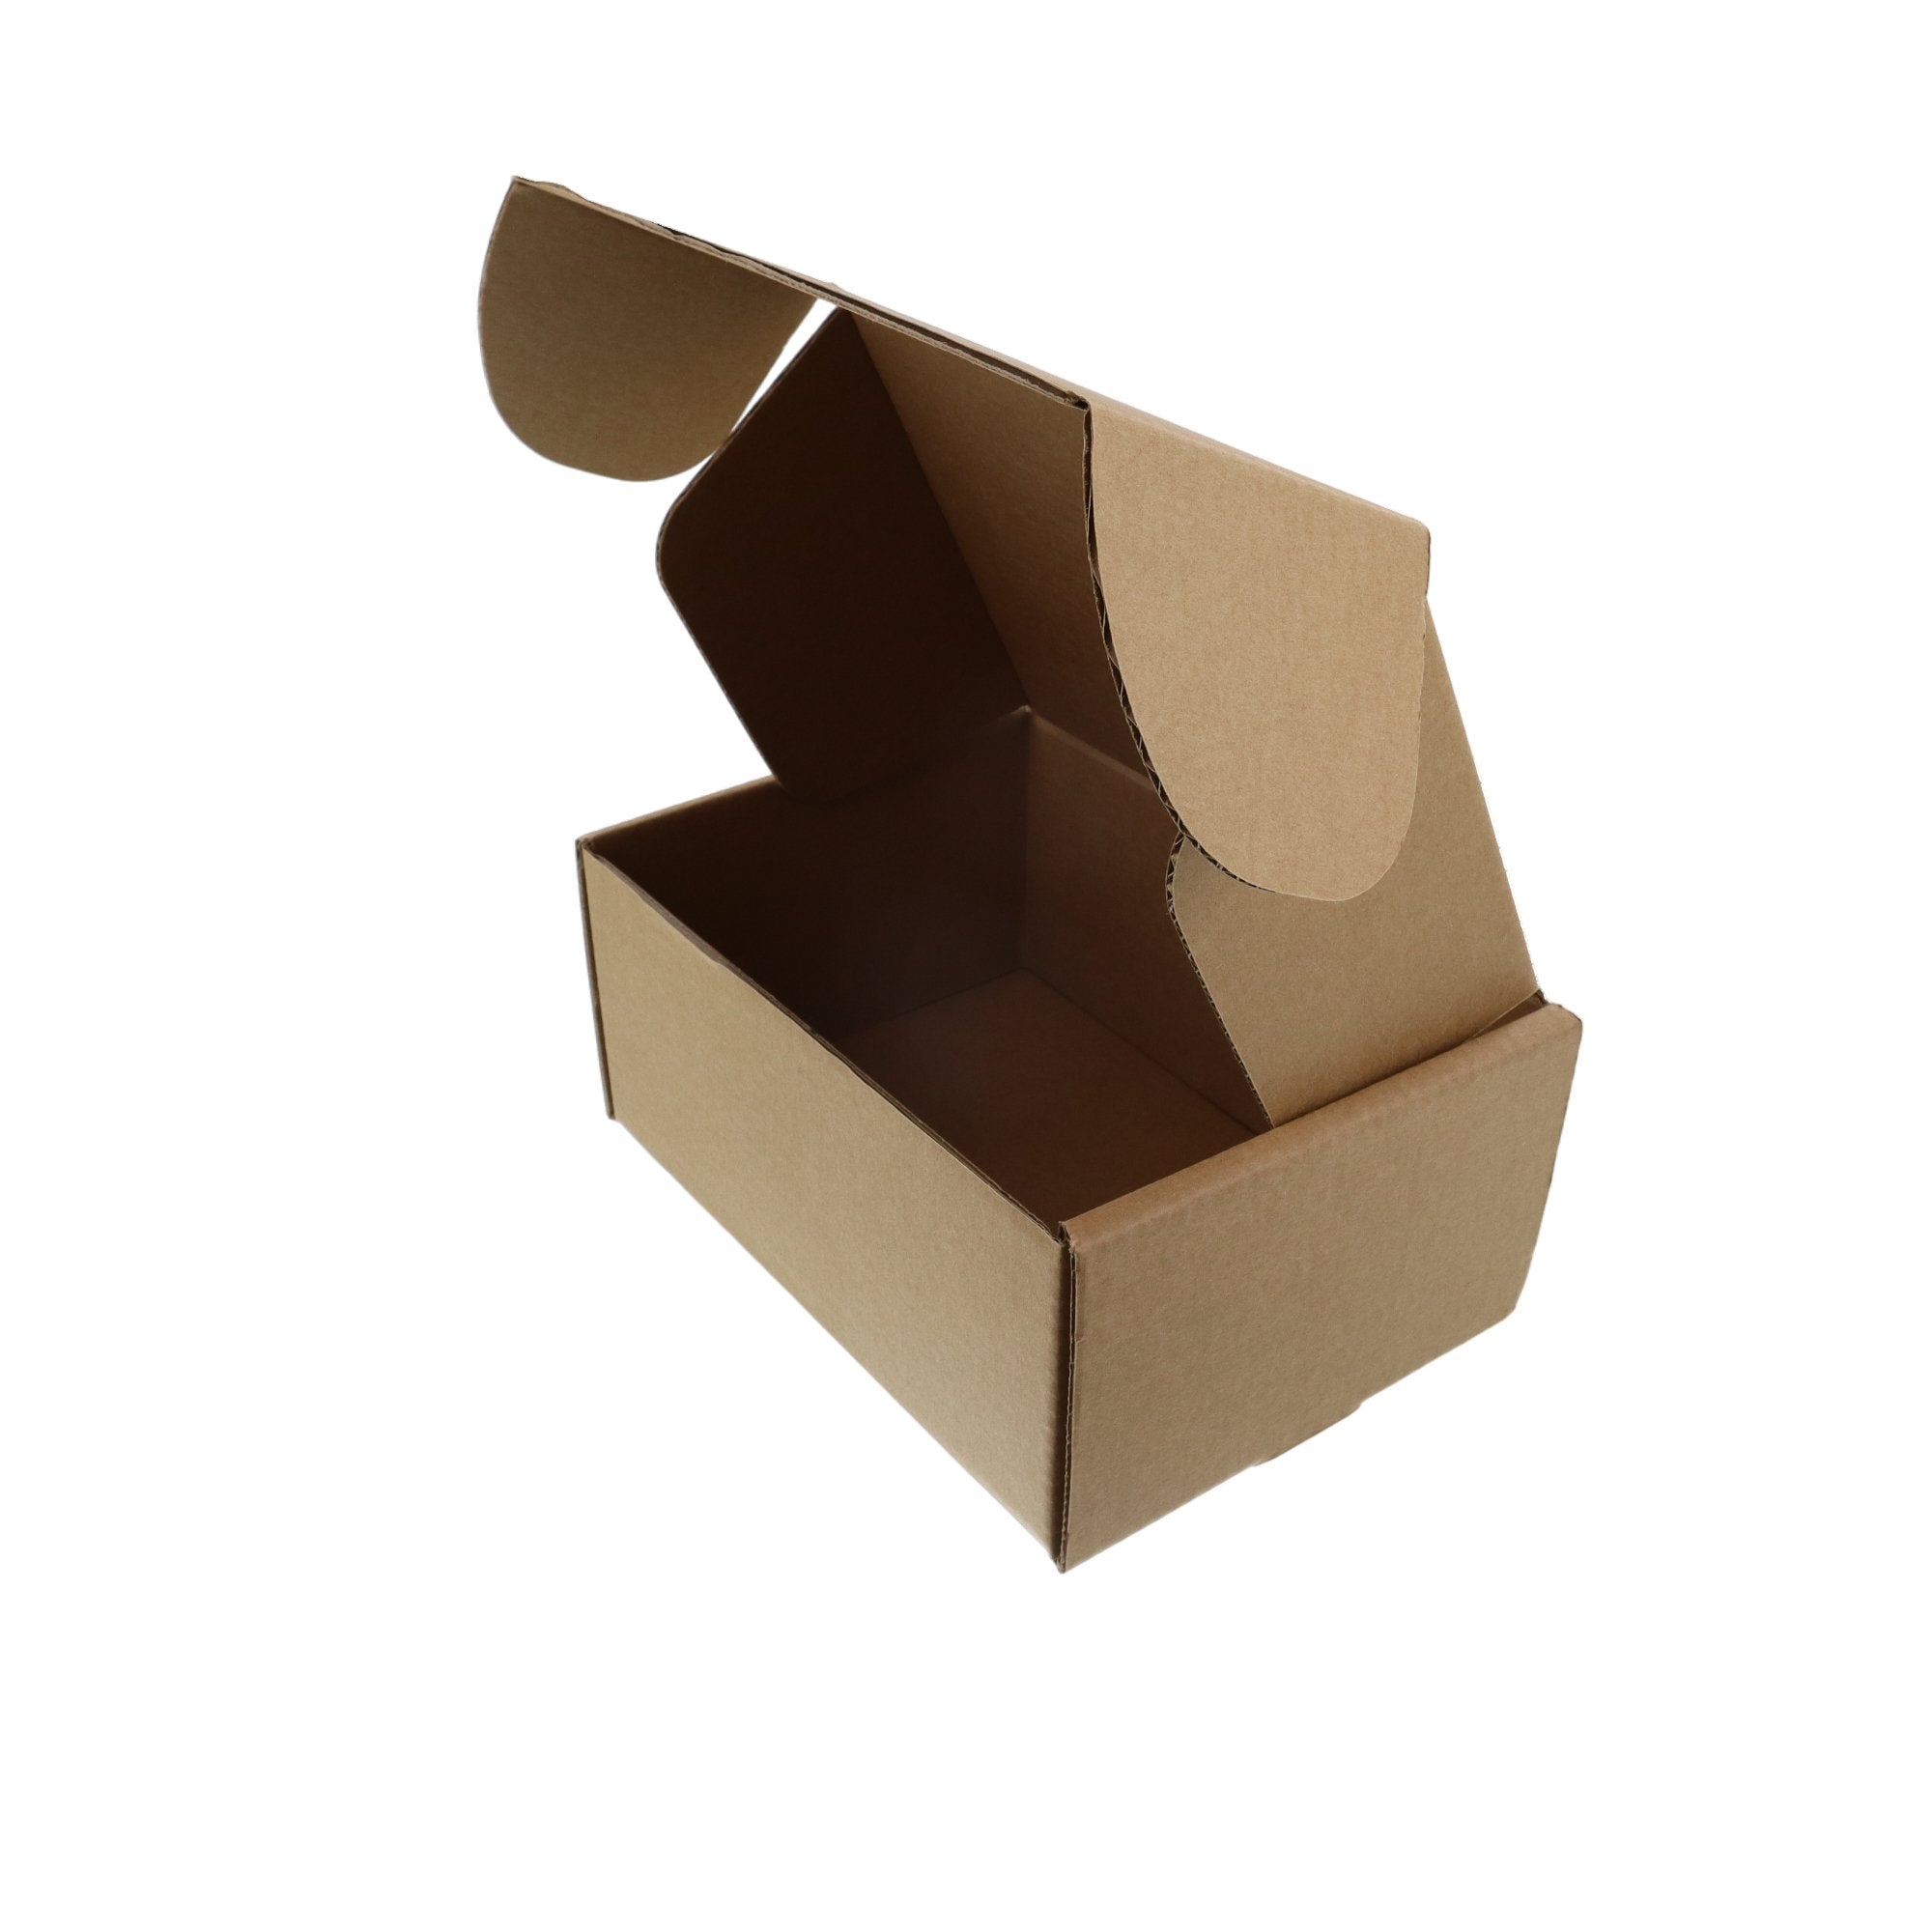 SAMPLE - Budget Mailer 4 One Piece Mailing Box [Express Value Buy] - PackQueen